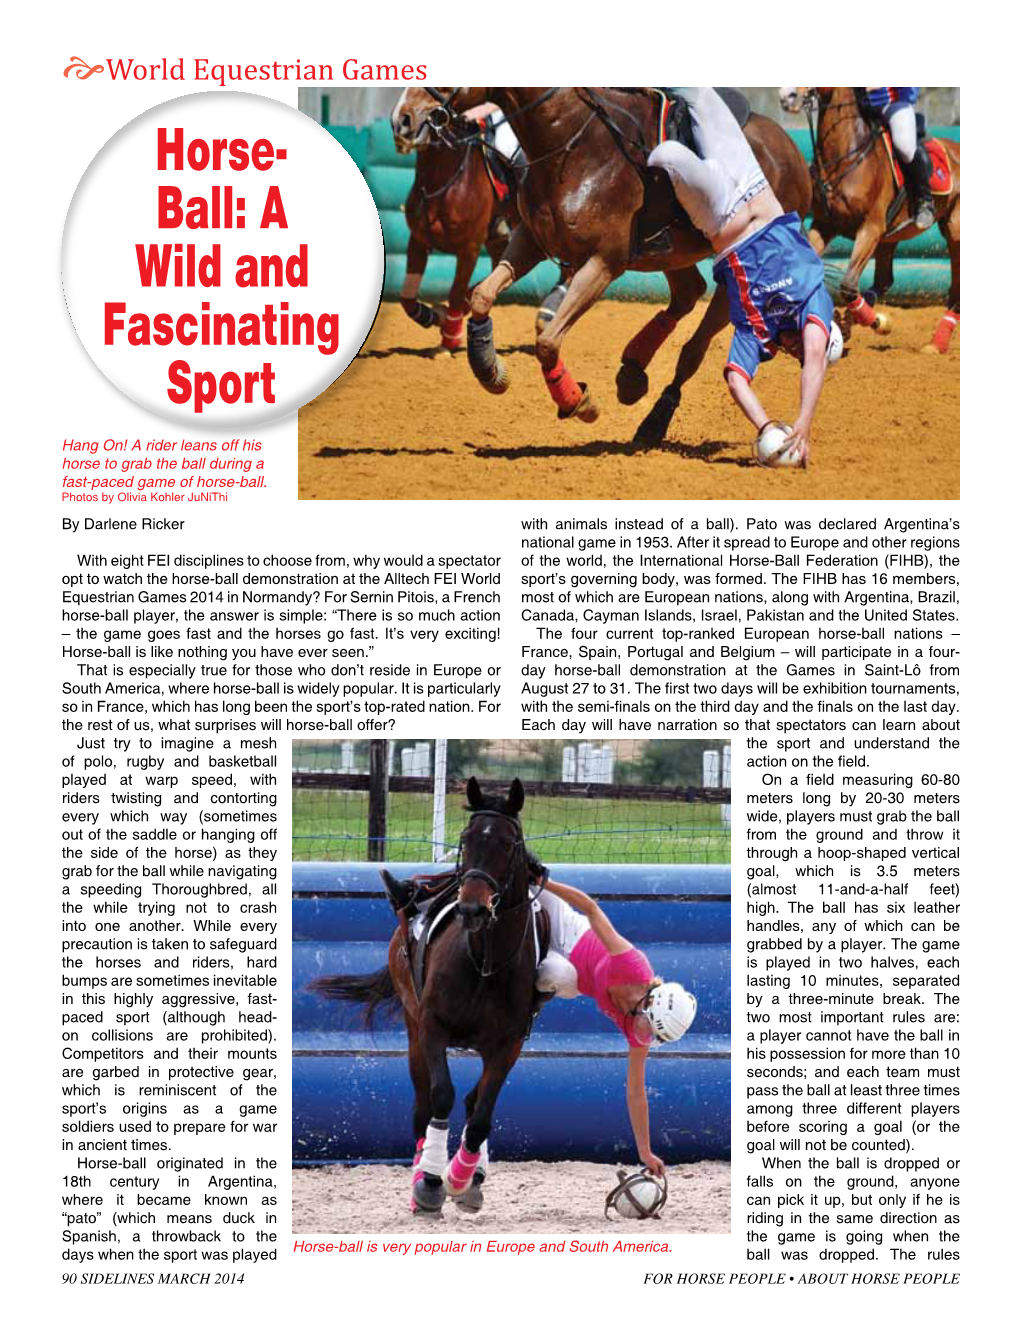 Ball: a Wild and Fascinating Sport Horse